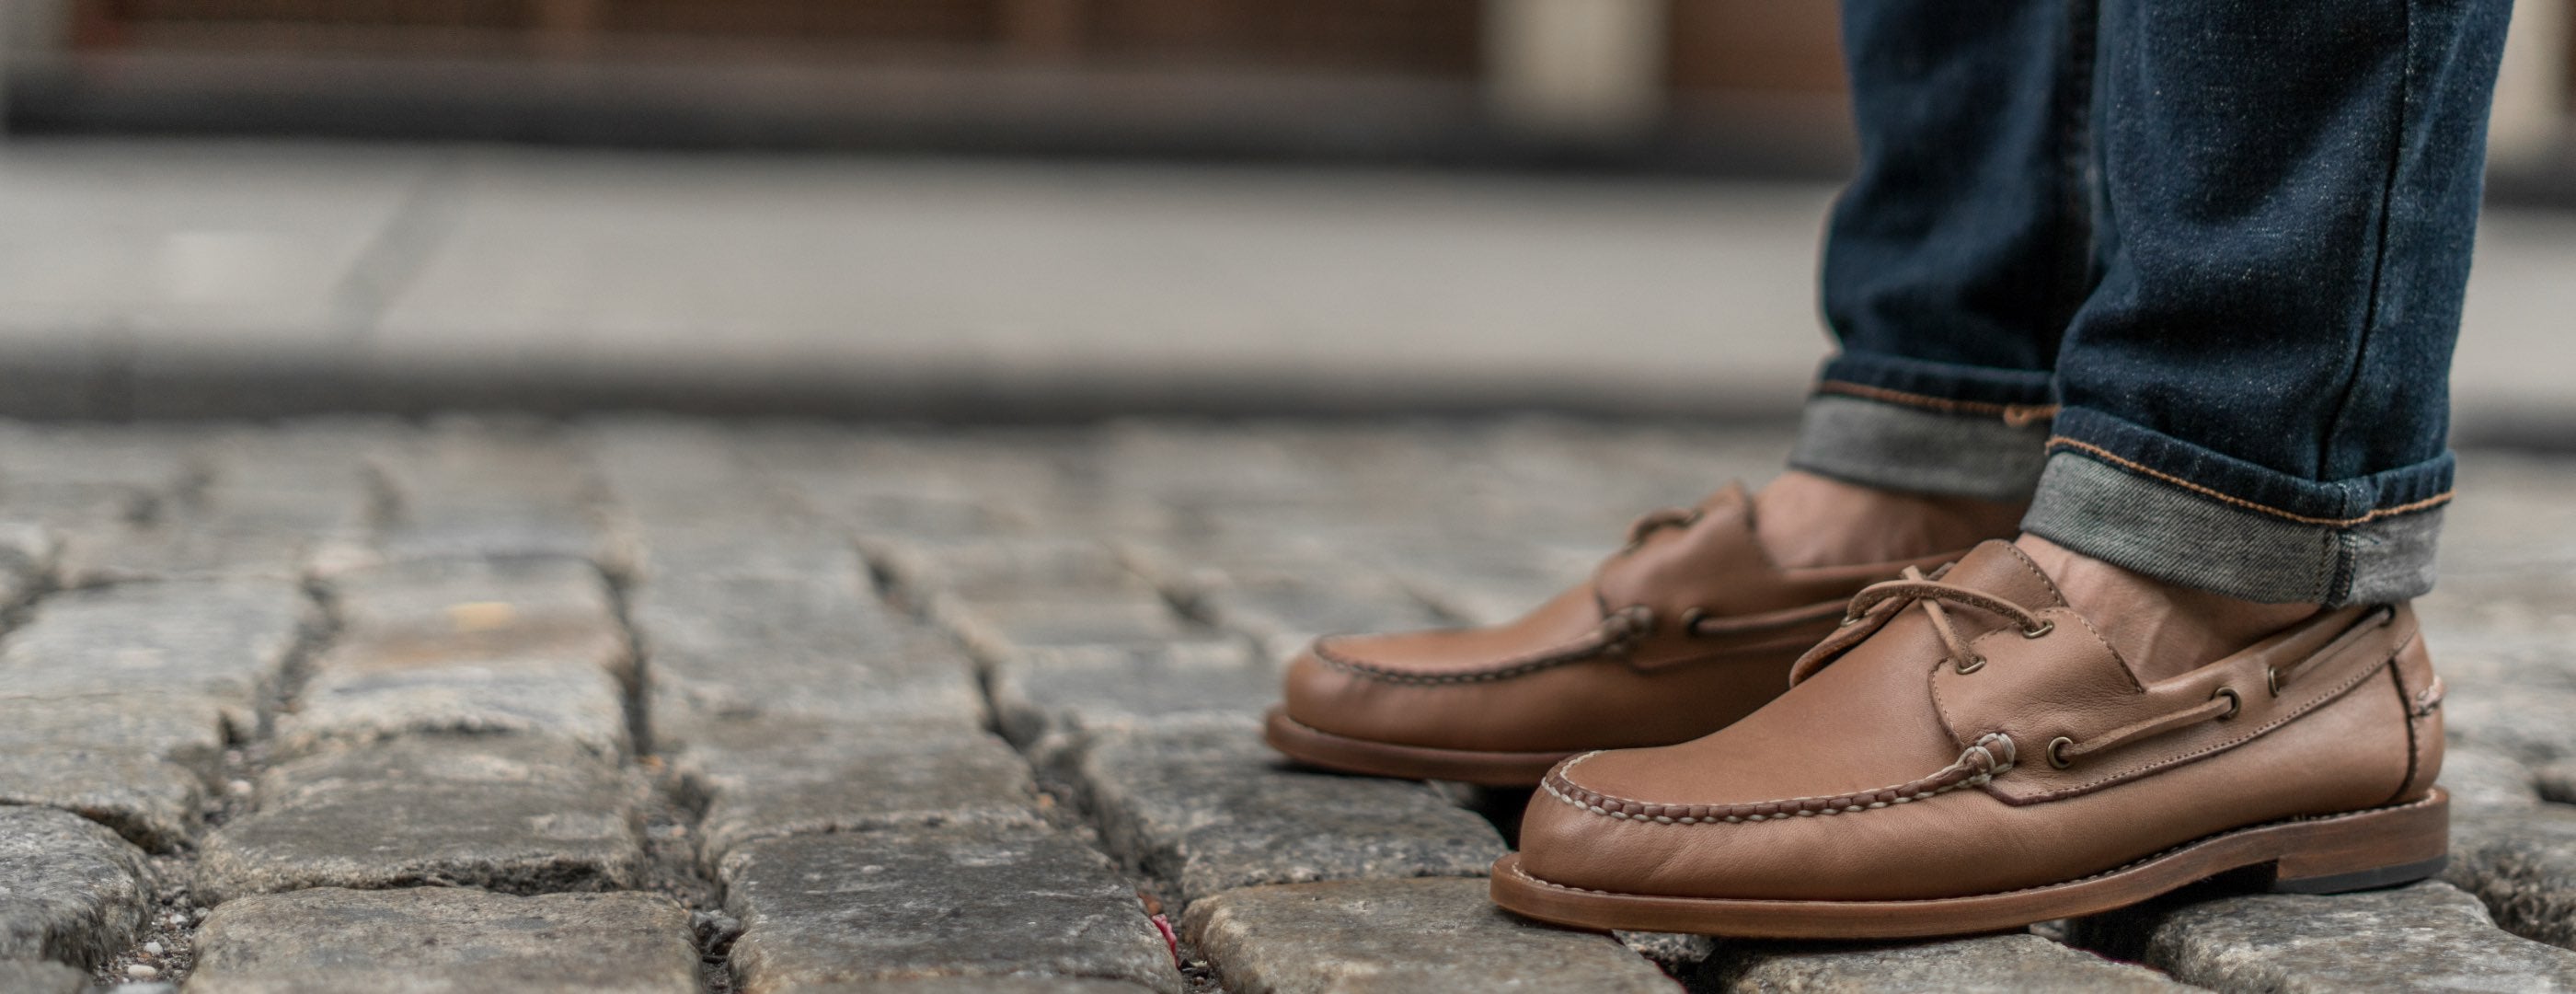 The Handsewn Loafer